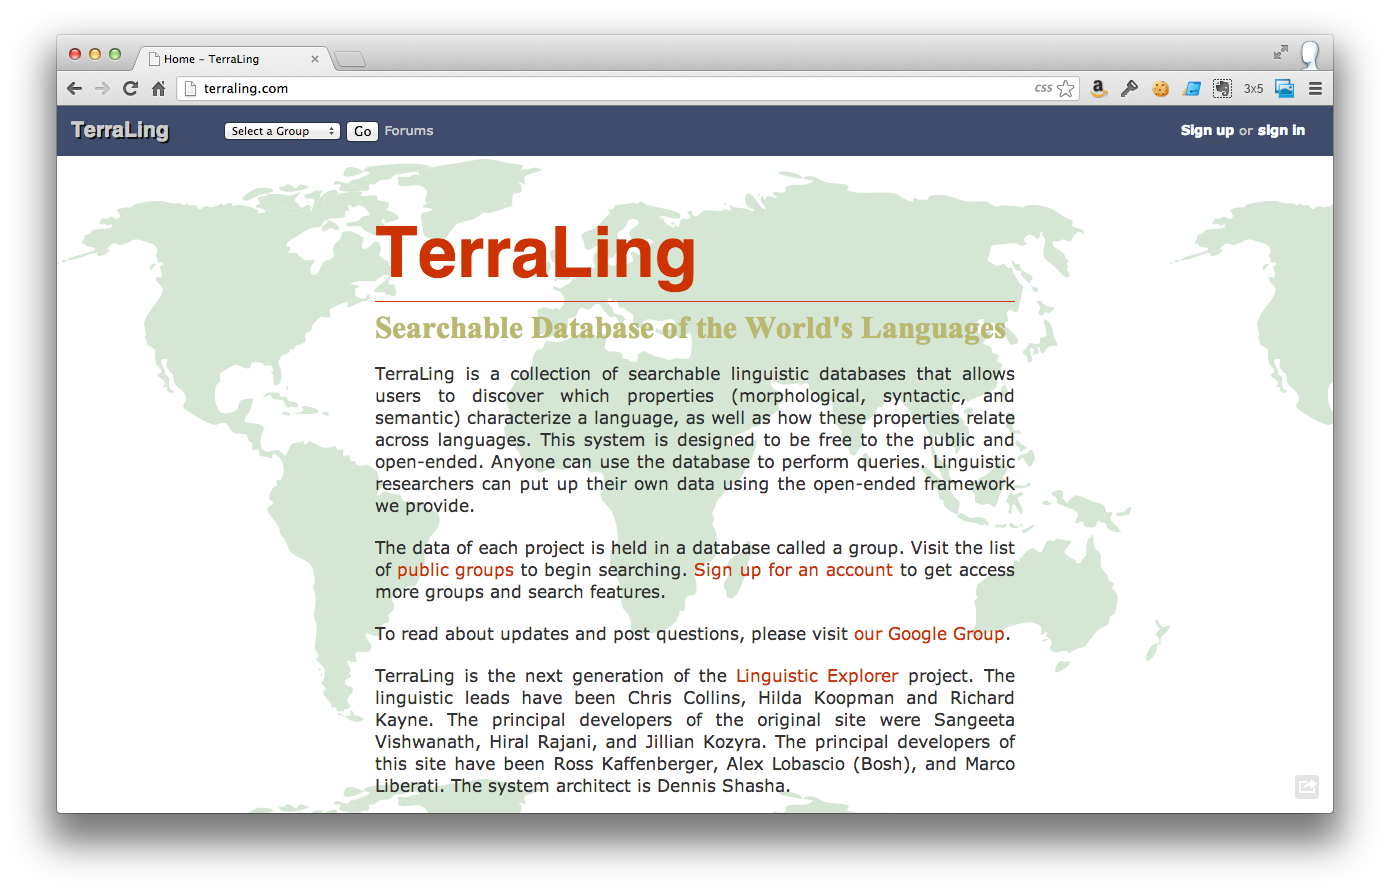 Terraling: searchable database of the world's languages